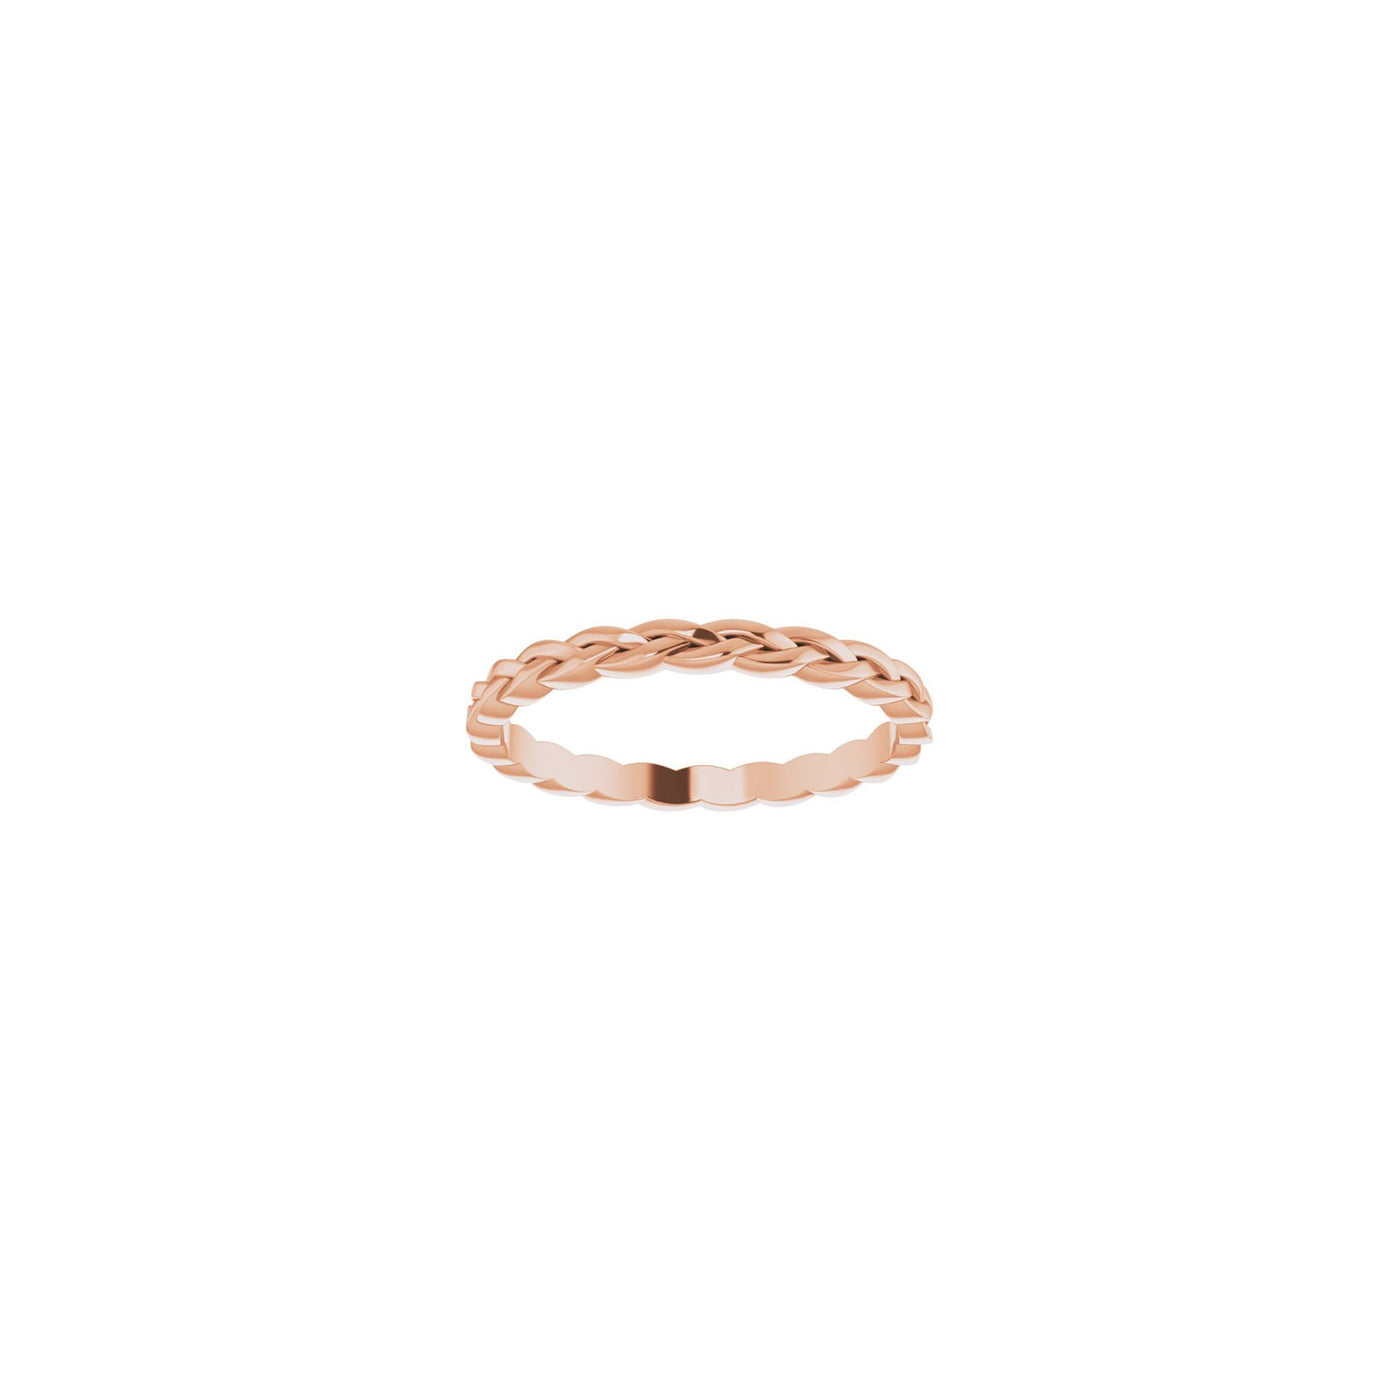 14K Gold Woven Band